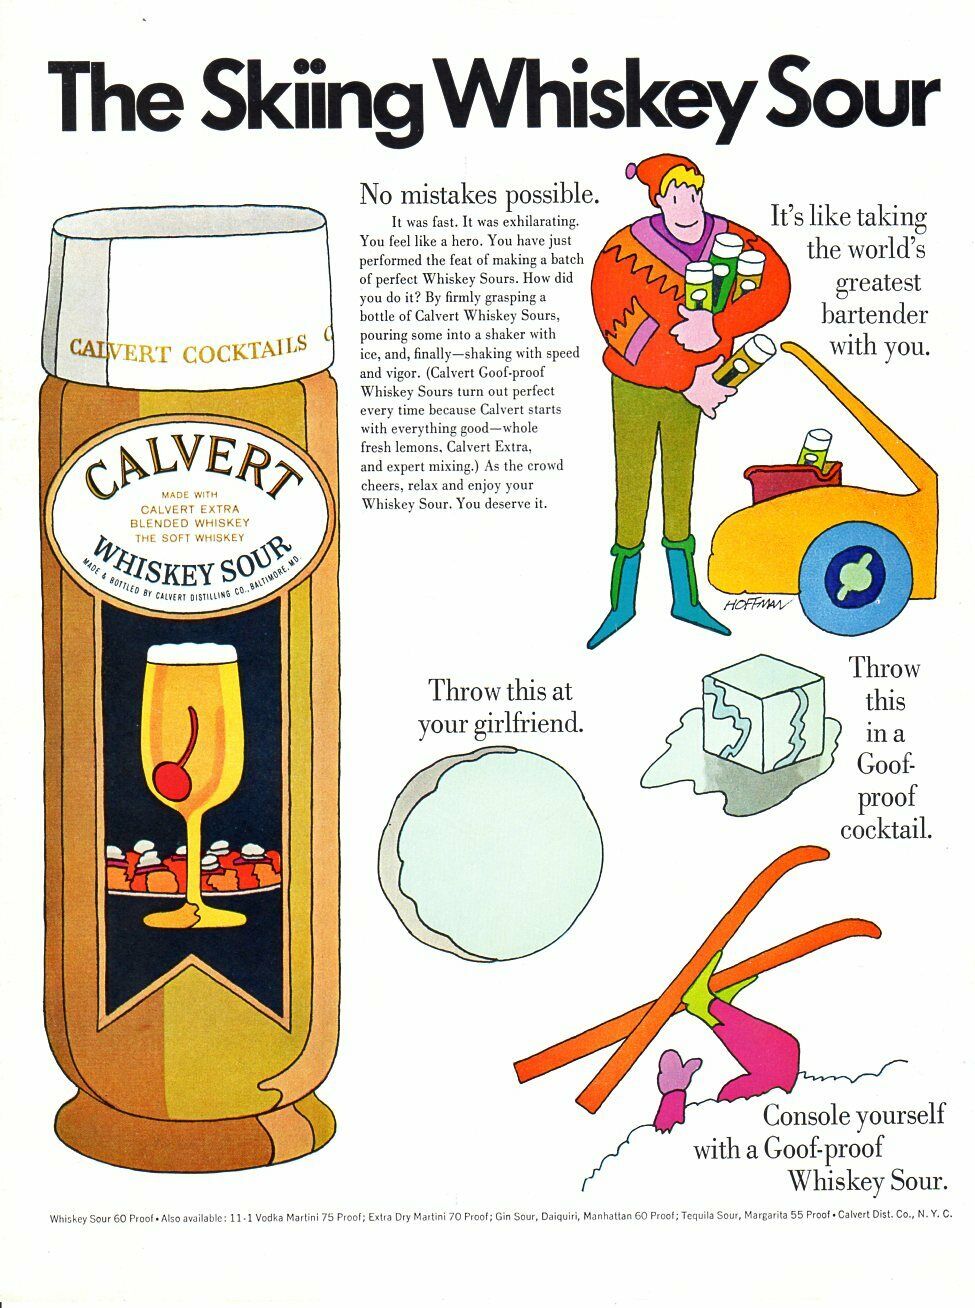 Vintage Advertising Print Alcohol Calvert Cocktails Skiing Whisky Sour Hoffman